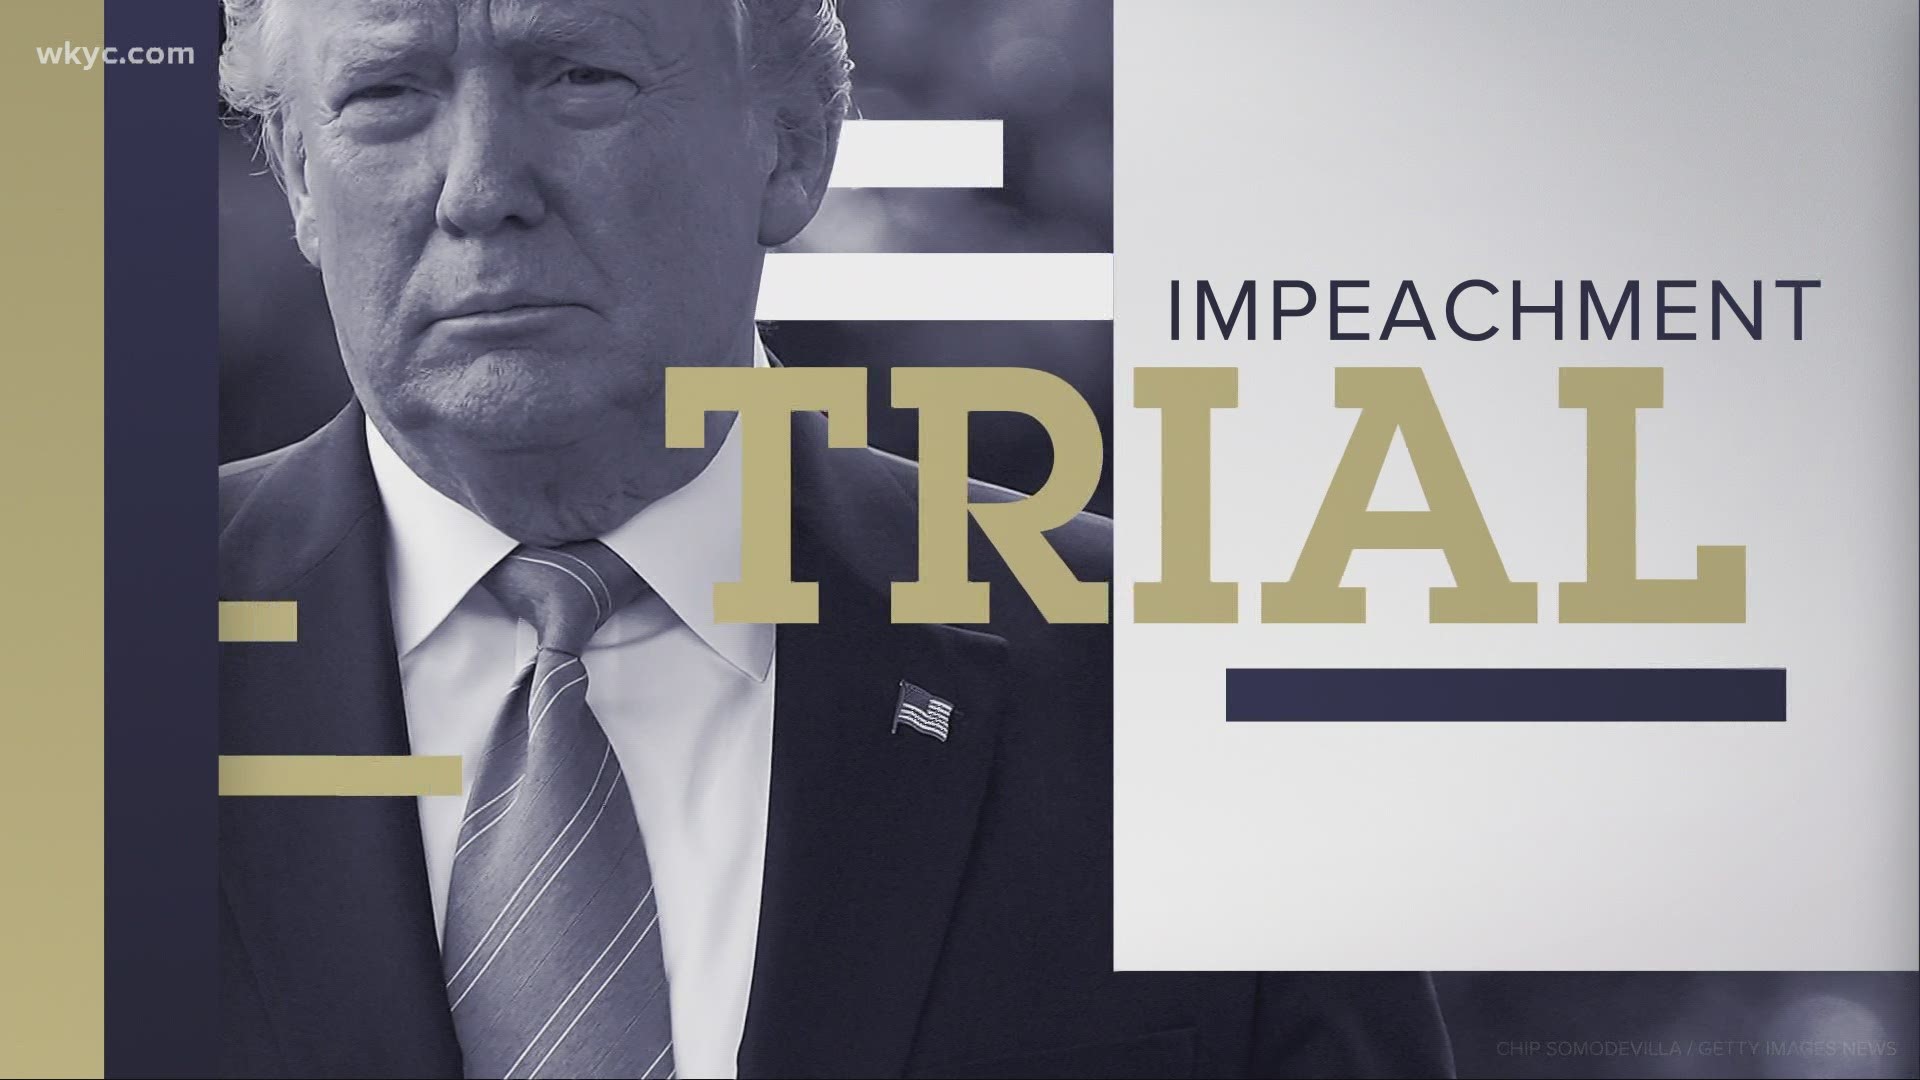 Friday was the fourth day of Trump's impeachment trial.  Trump defense team, Democratic prosecutors took questions from senators in today's session.